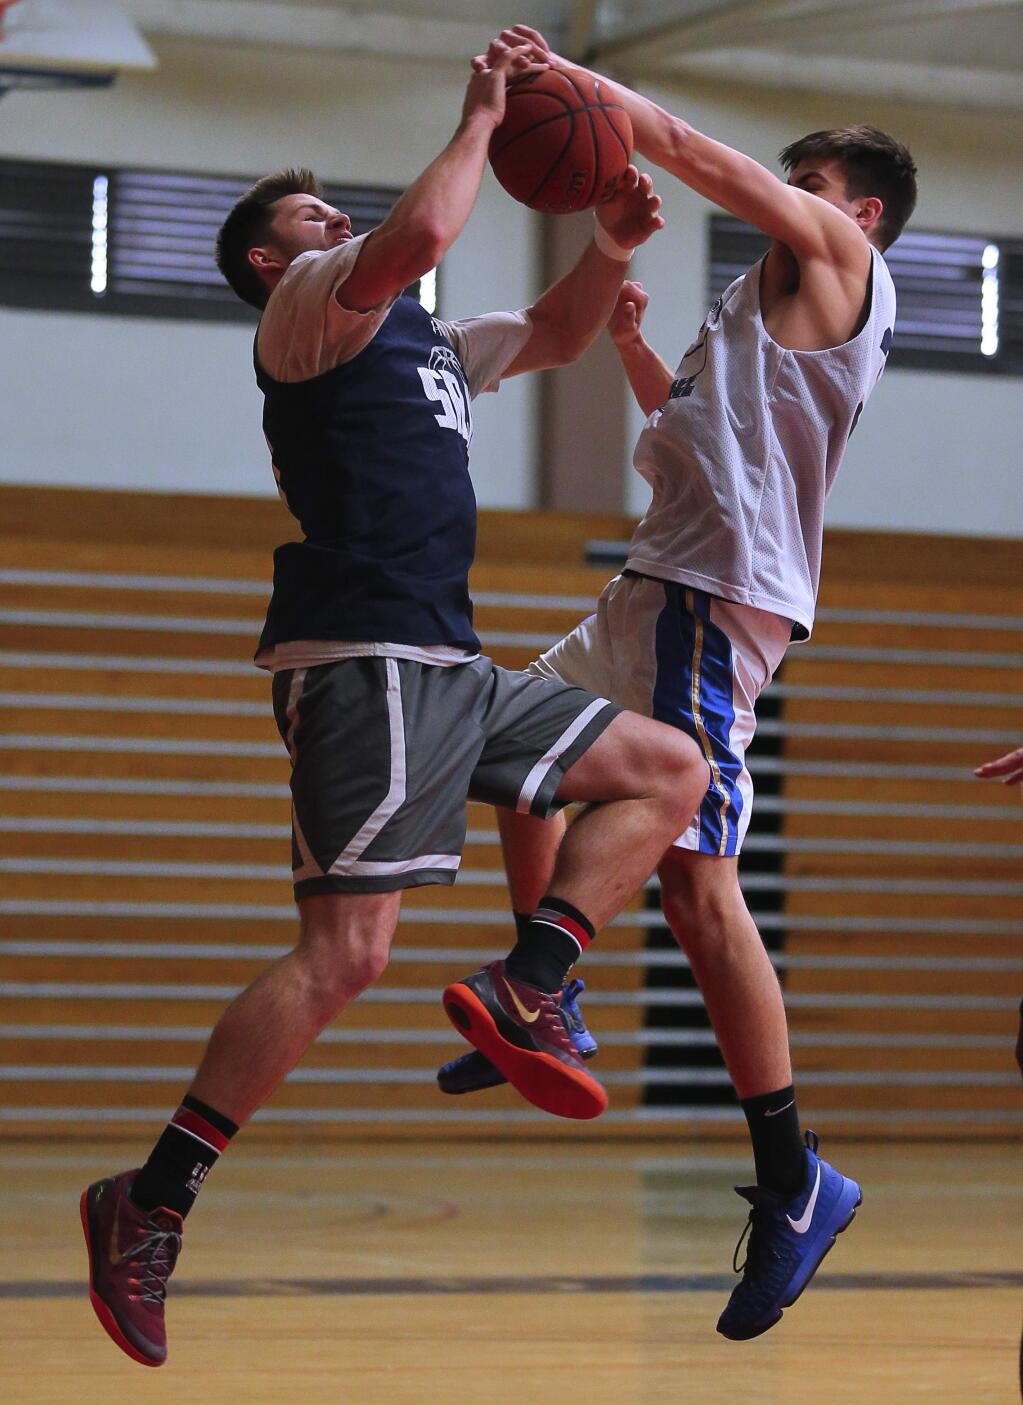 SRJC's Jon Montez left, is blocked by John McMillan as he drives to the basket during practice in Santa Rosa on Monday, February 13, 2017. (Christopher Chung/ The Press Democrat)